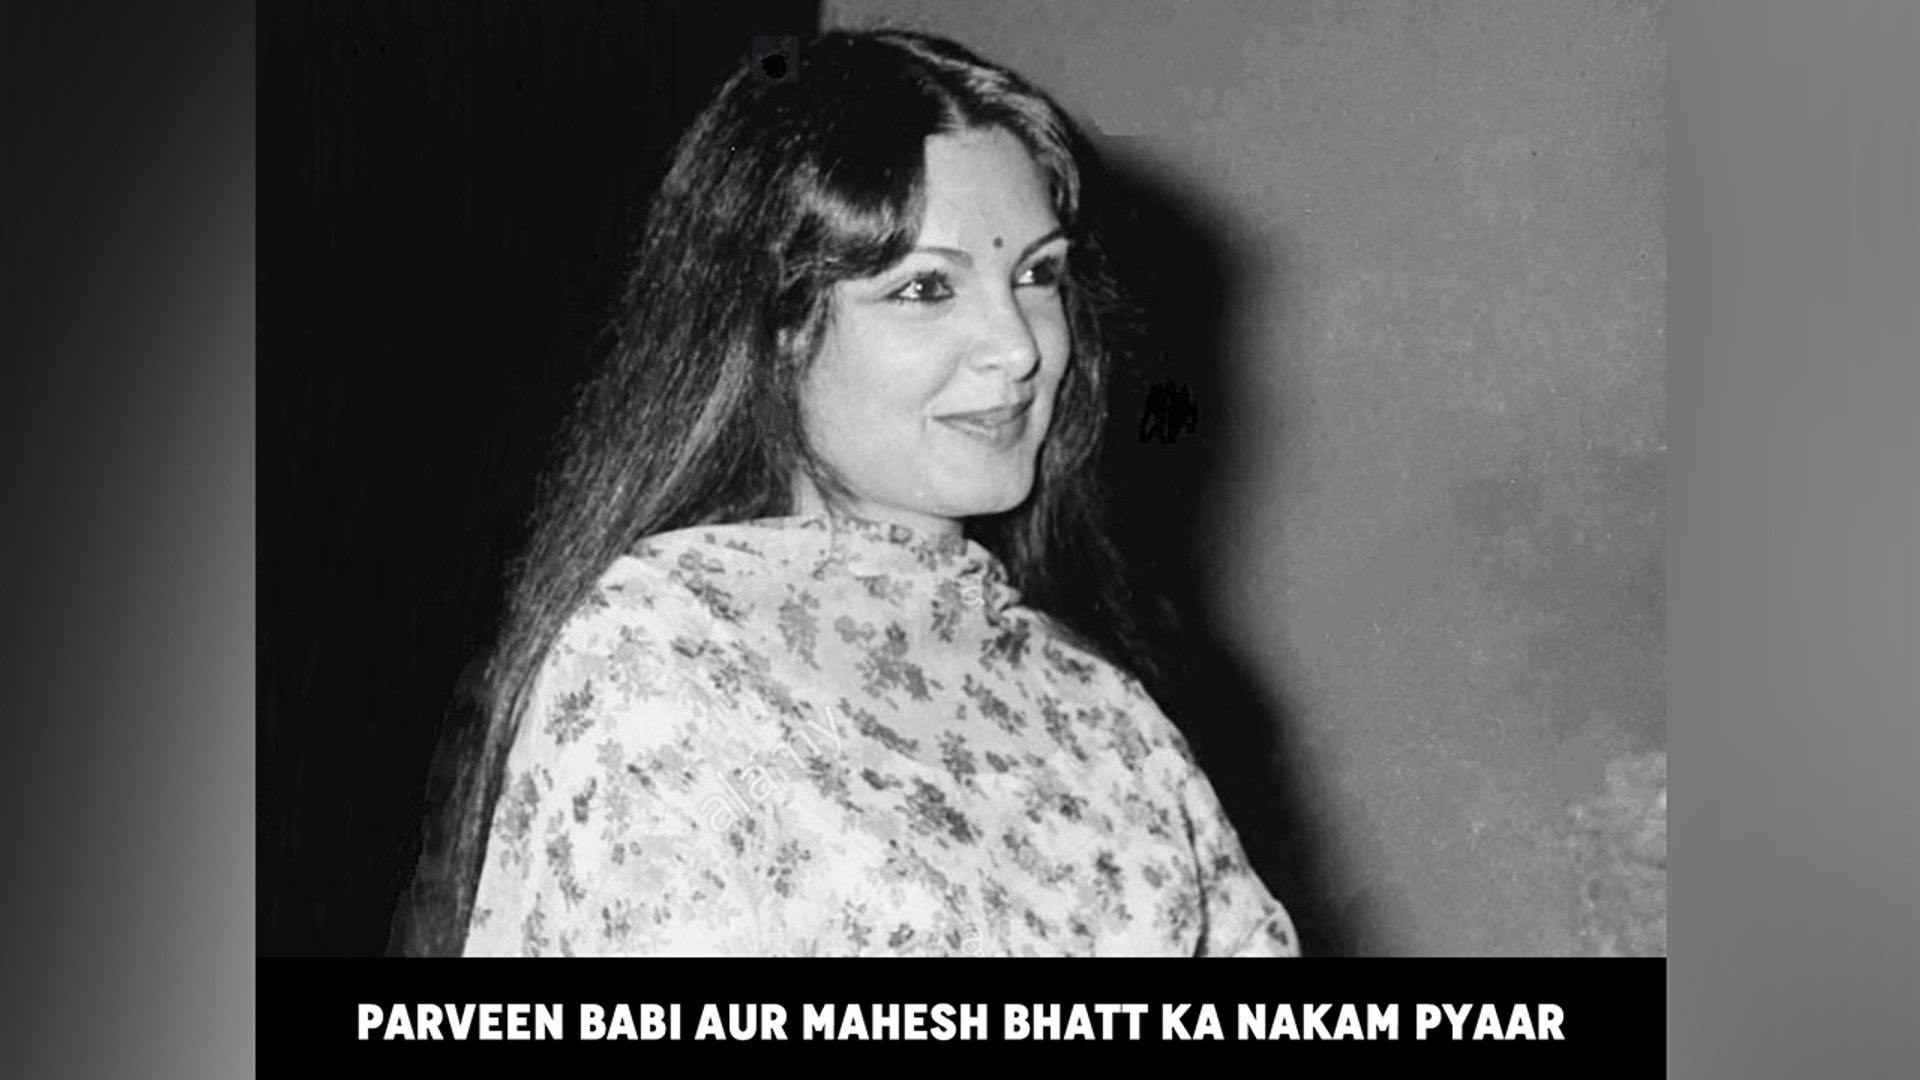 The latest Parveen Babi videos on Dailymotion